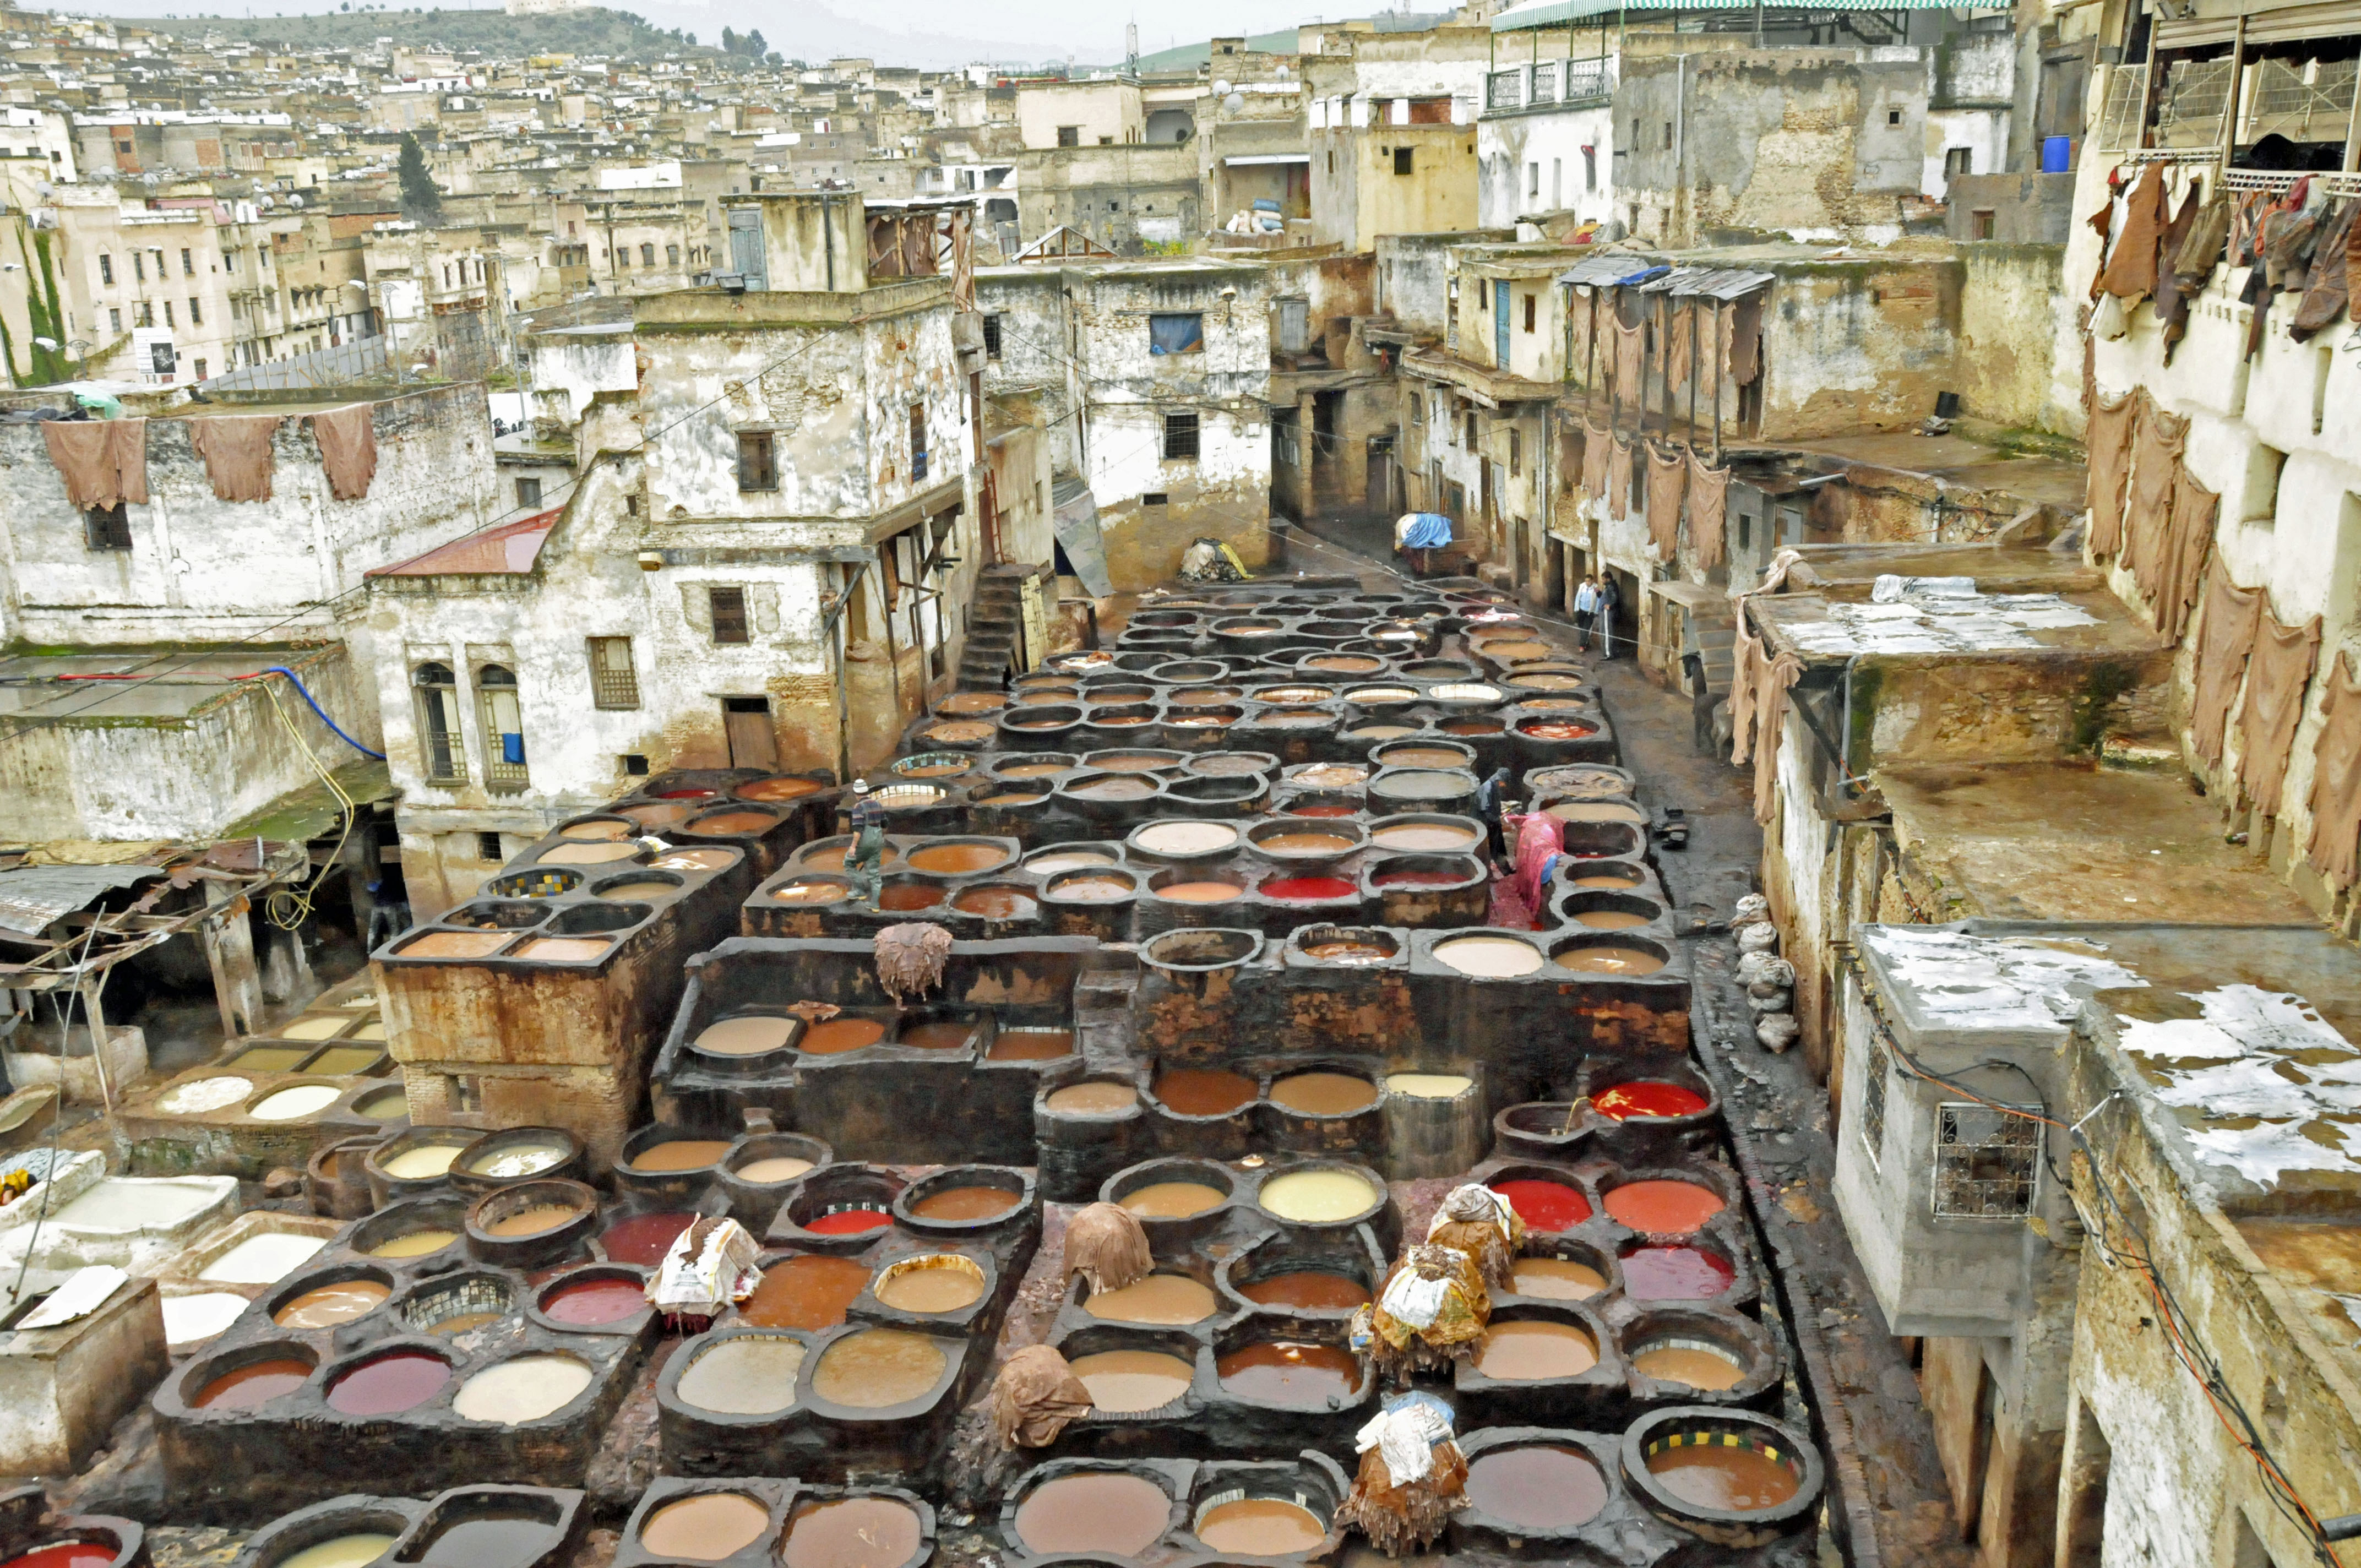 Tannery in Fes el Bali, Morocco (Photo by Don Knebel)